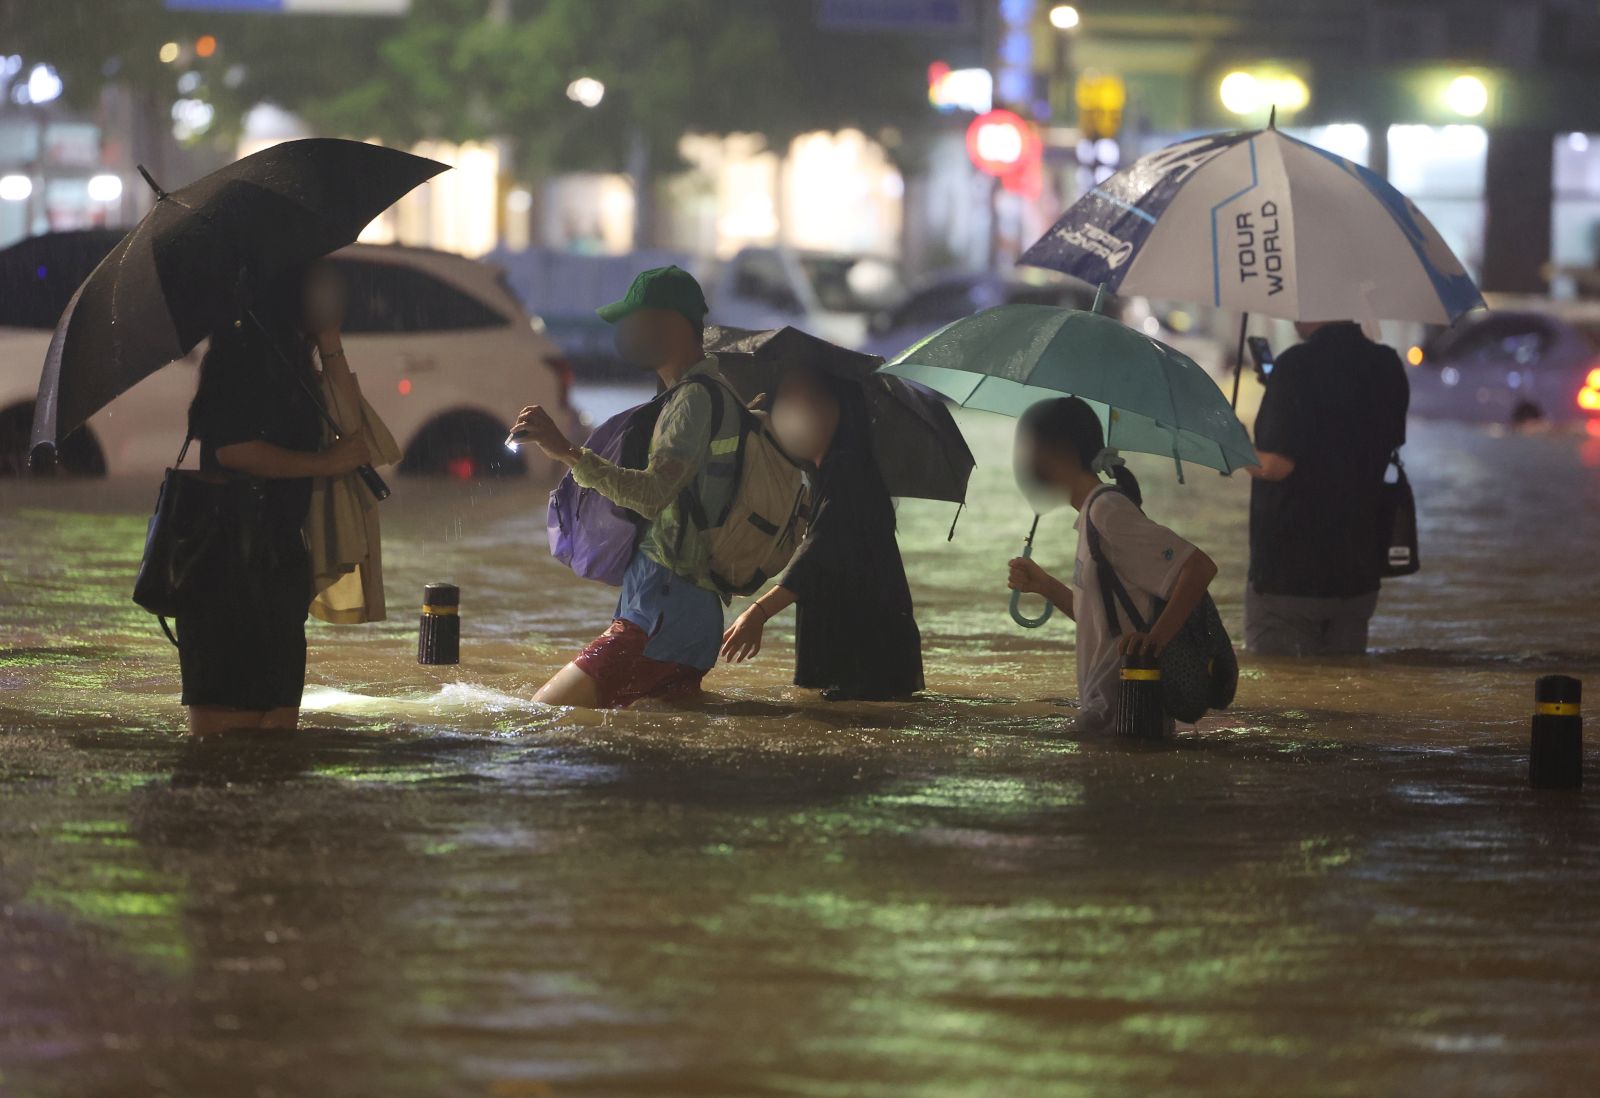 epa10112000 People wade though an inundated road in southern Seoul, South Korea, 08 August 2022 (issued 09 August 2022), as heavy rainfall of over 100 millimeters per hour, the heaviest in 80 years, battered Seoul and surrounding areas.  EPA/YONHAP SOUTH KOREA OUT